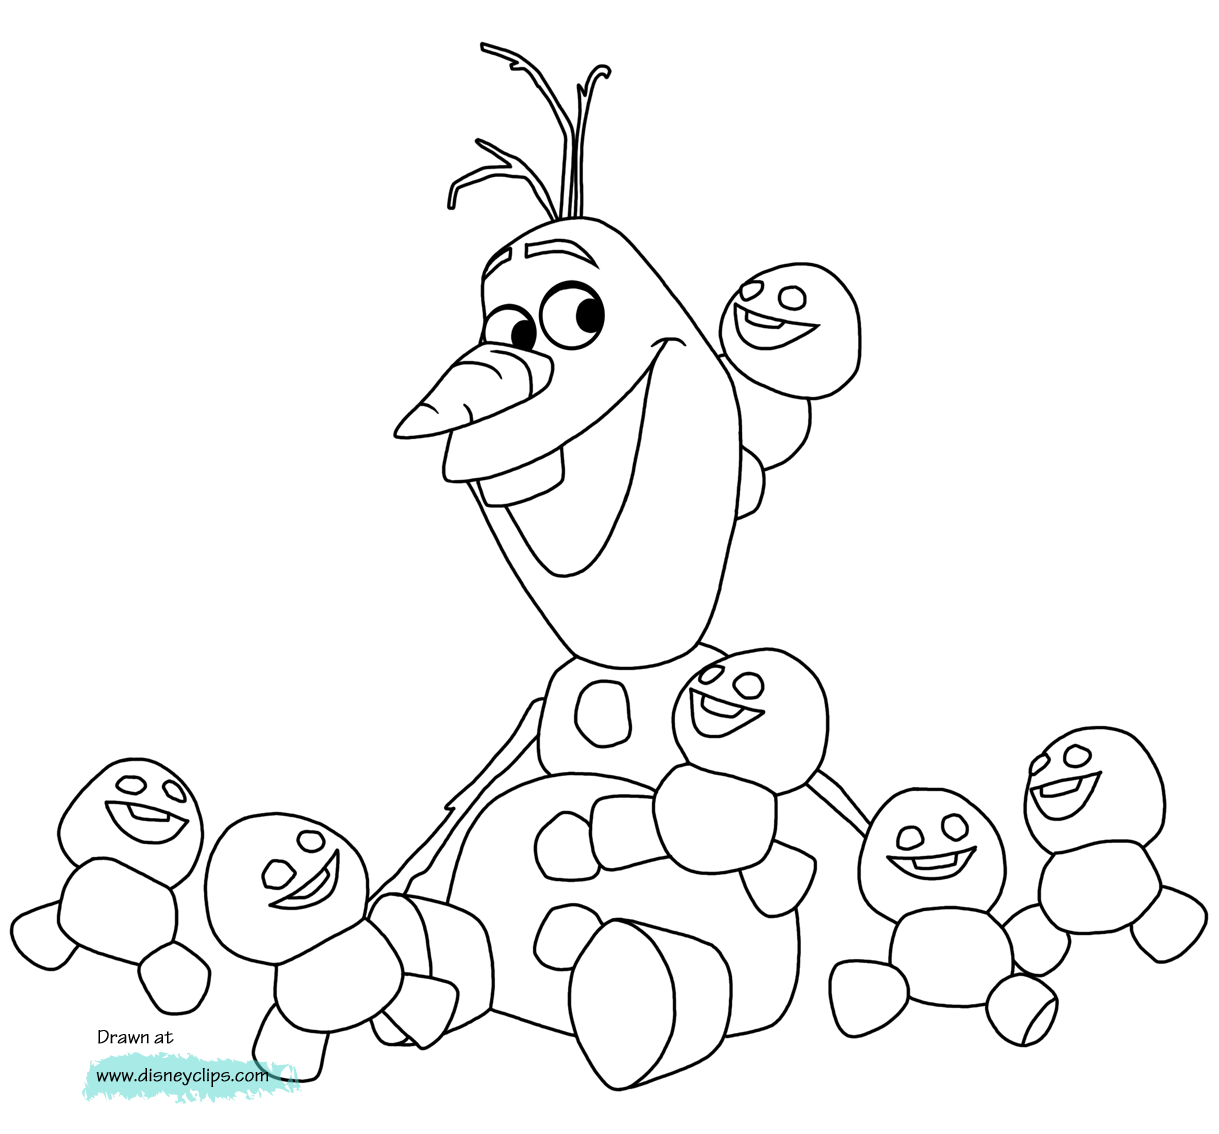 Free Olaf Coloring Pages, Download Free Olaf Coloring Pages png images